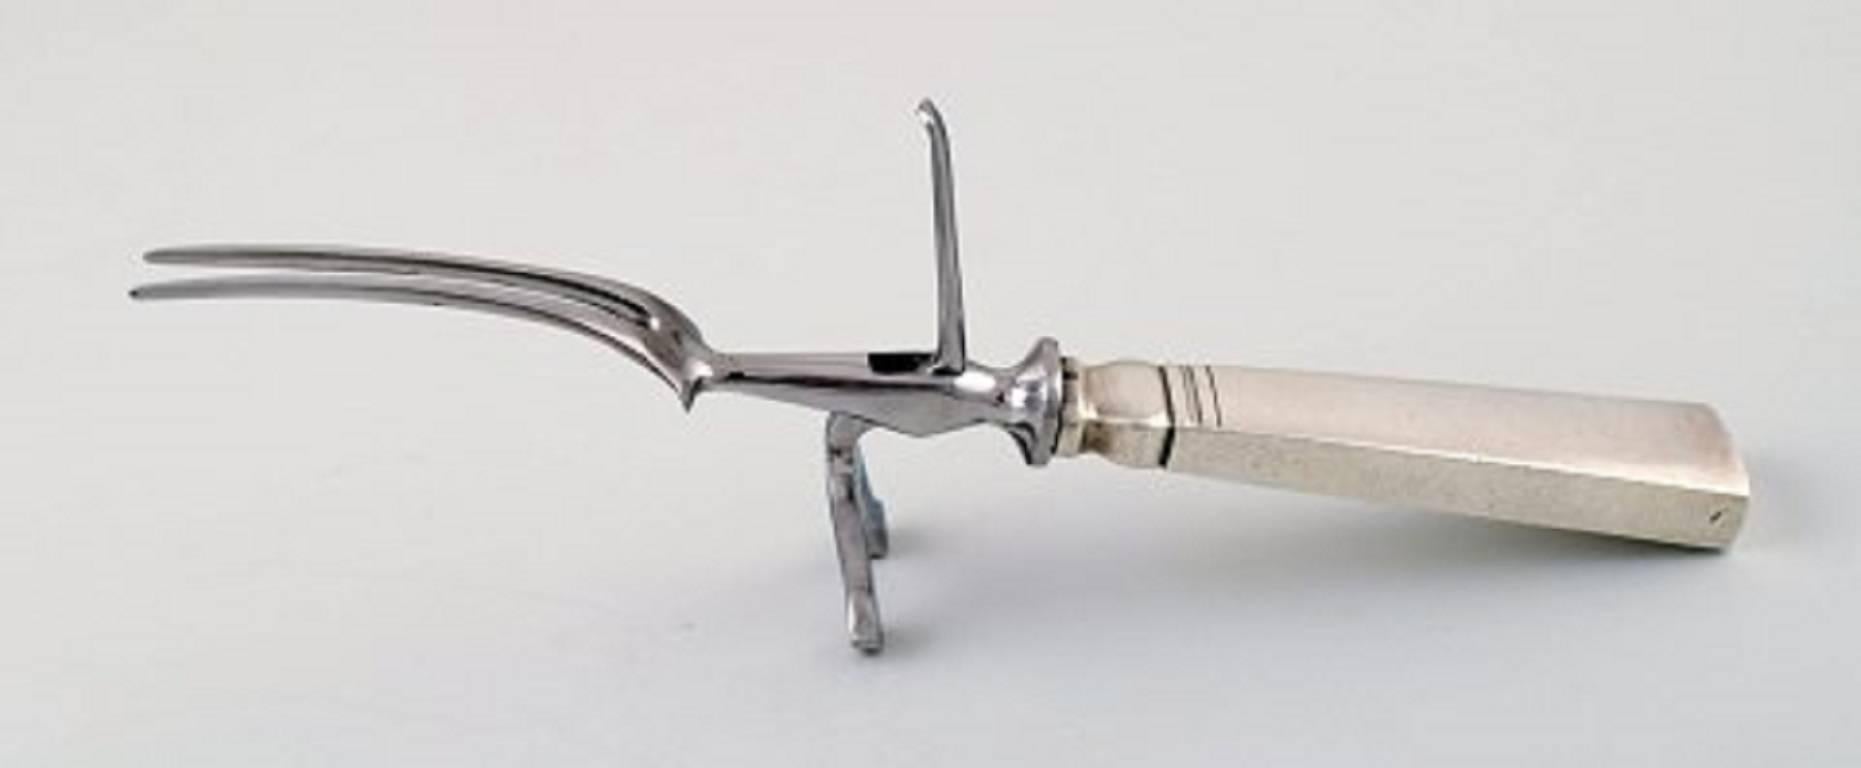 Georg Jensen sterling silver block / acadia carving set.
Measures: knife 26 cm.
Designed by Just Andersen, 1934.
In perfect condition.
Stamped.